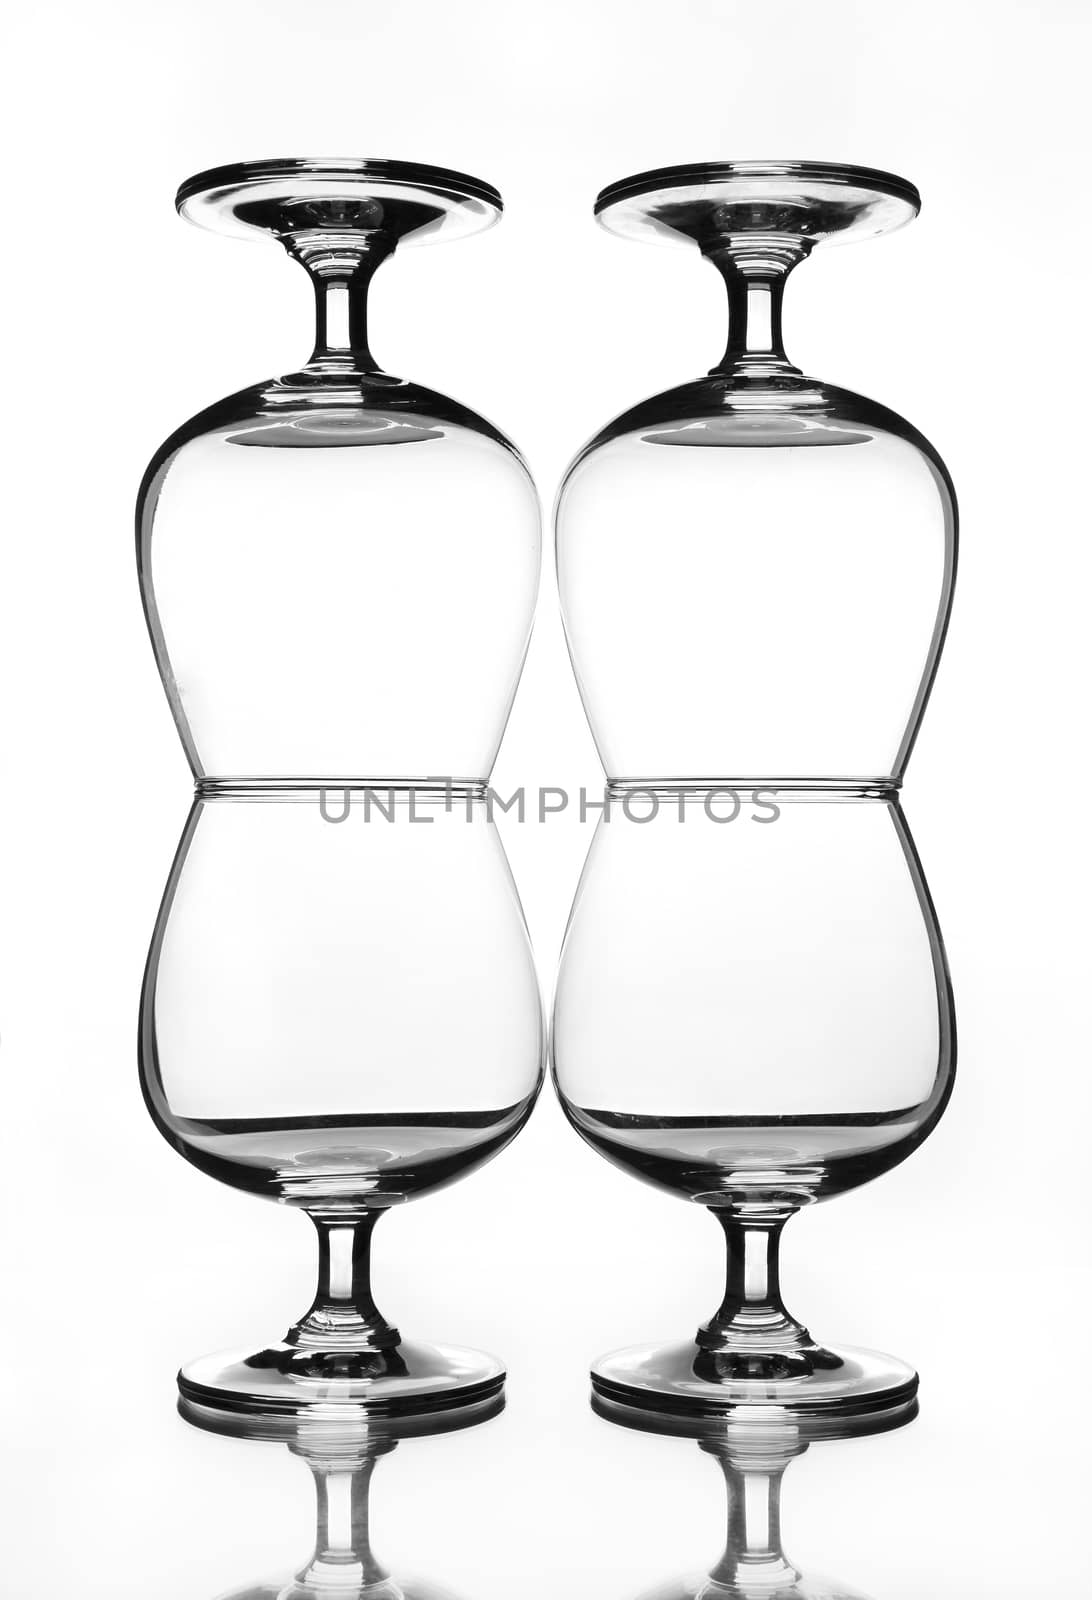 stack of empty wine glass with shadow (gray scale)